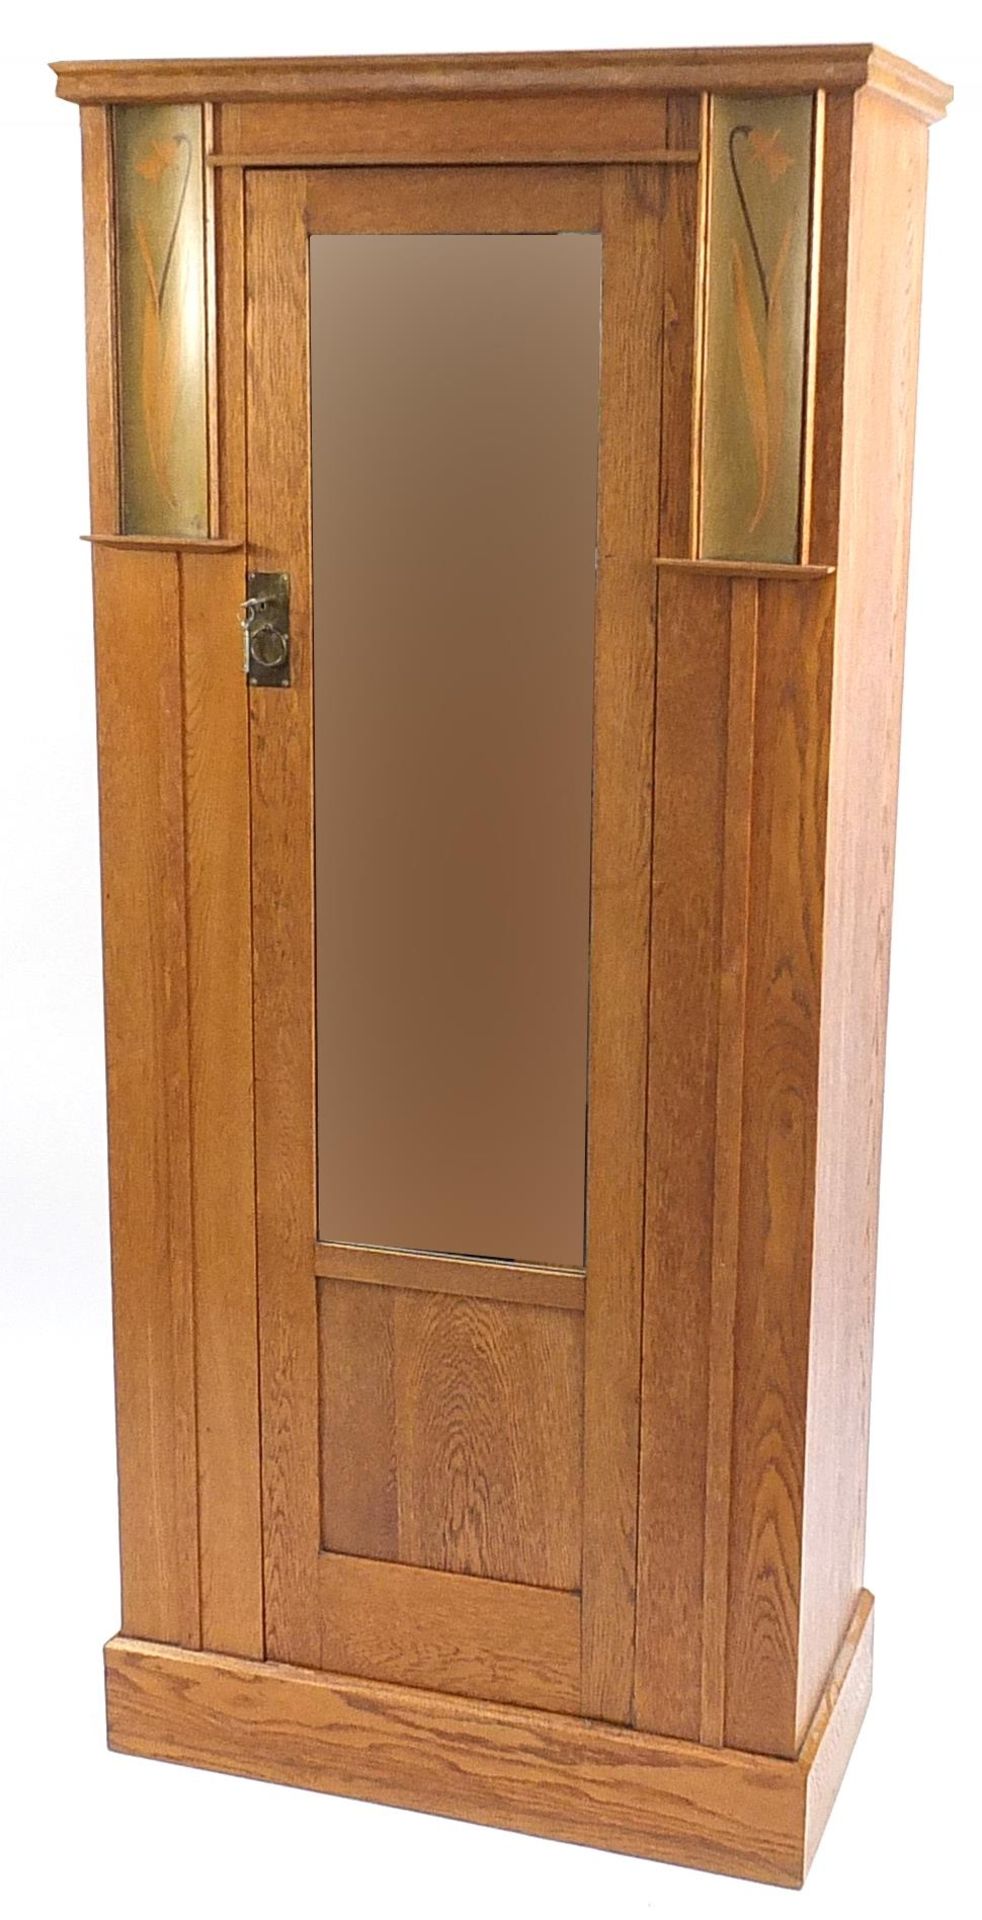 Manner of Baillie Scott, Liberty & Co Arts & Crafts oak wardrobe with mirrored door inlaid with daf - Image 2 of 5